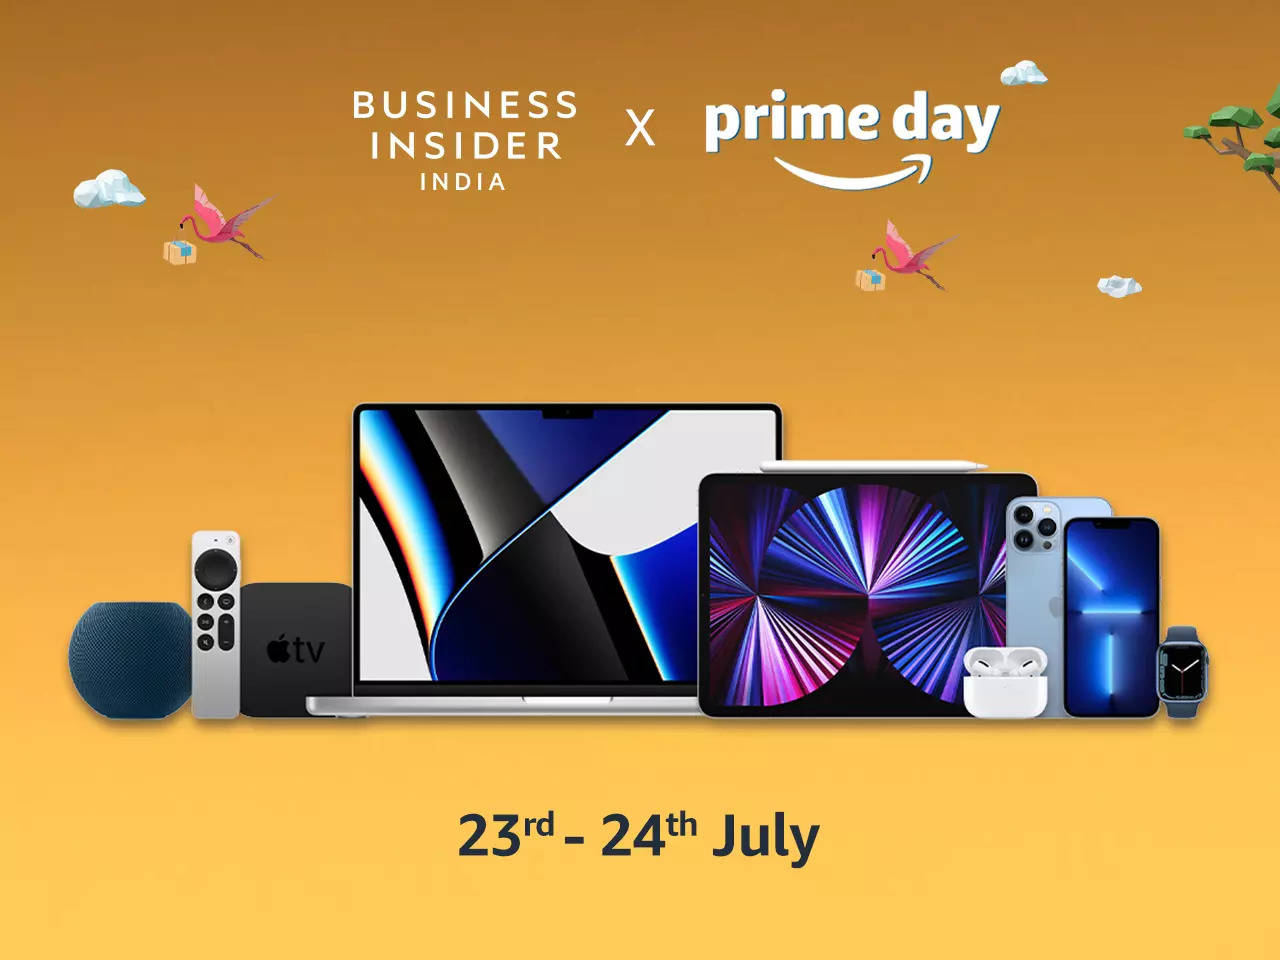 Best Prime Day deals on Apple devices Discount and offers on iPhone 13